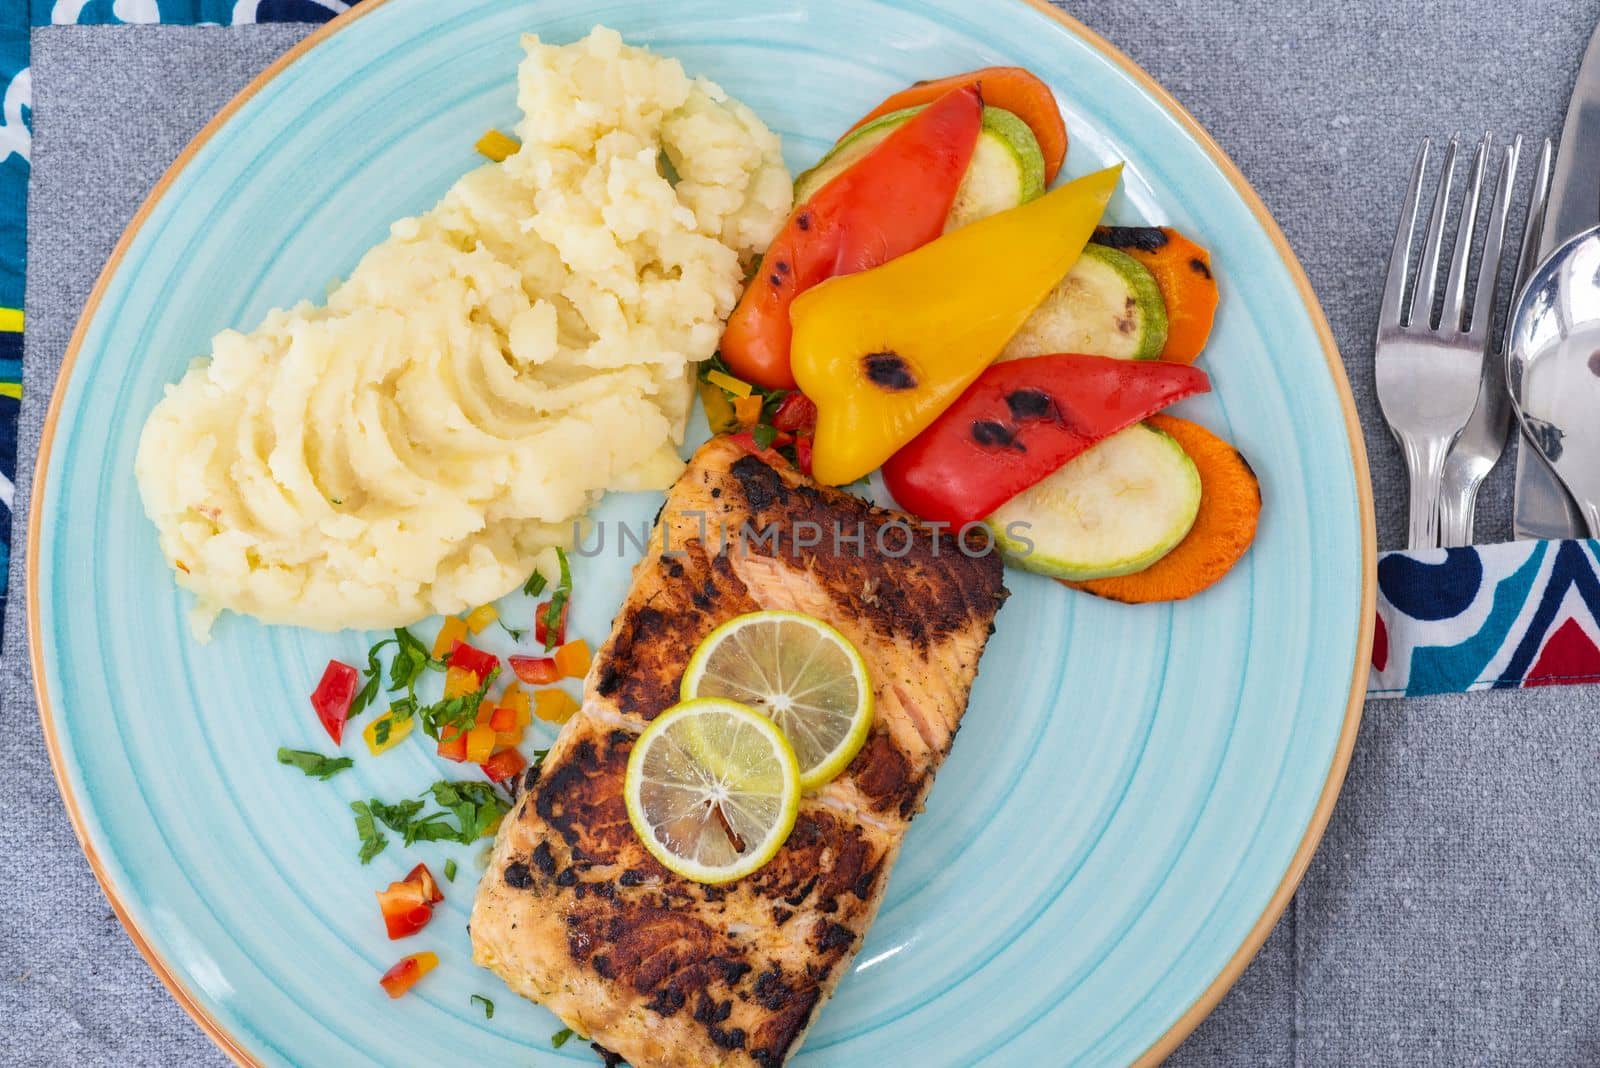 Salmon steak a la carte meal with vegetables and mashed potato at restaurant table setting